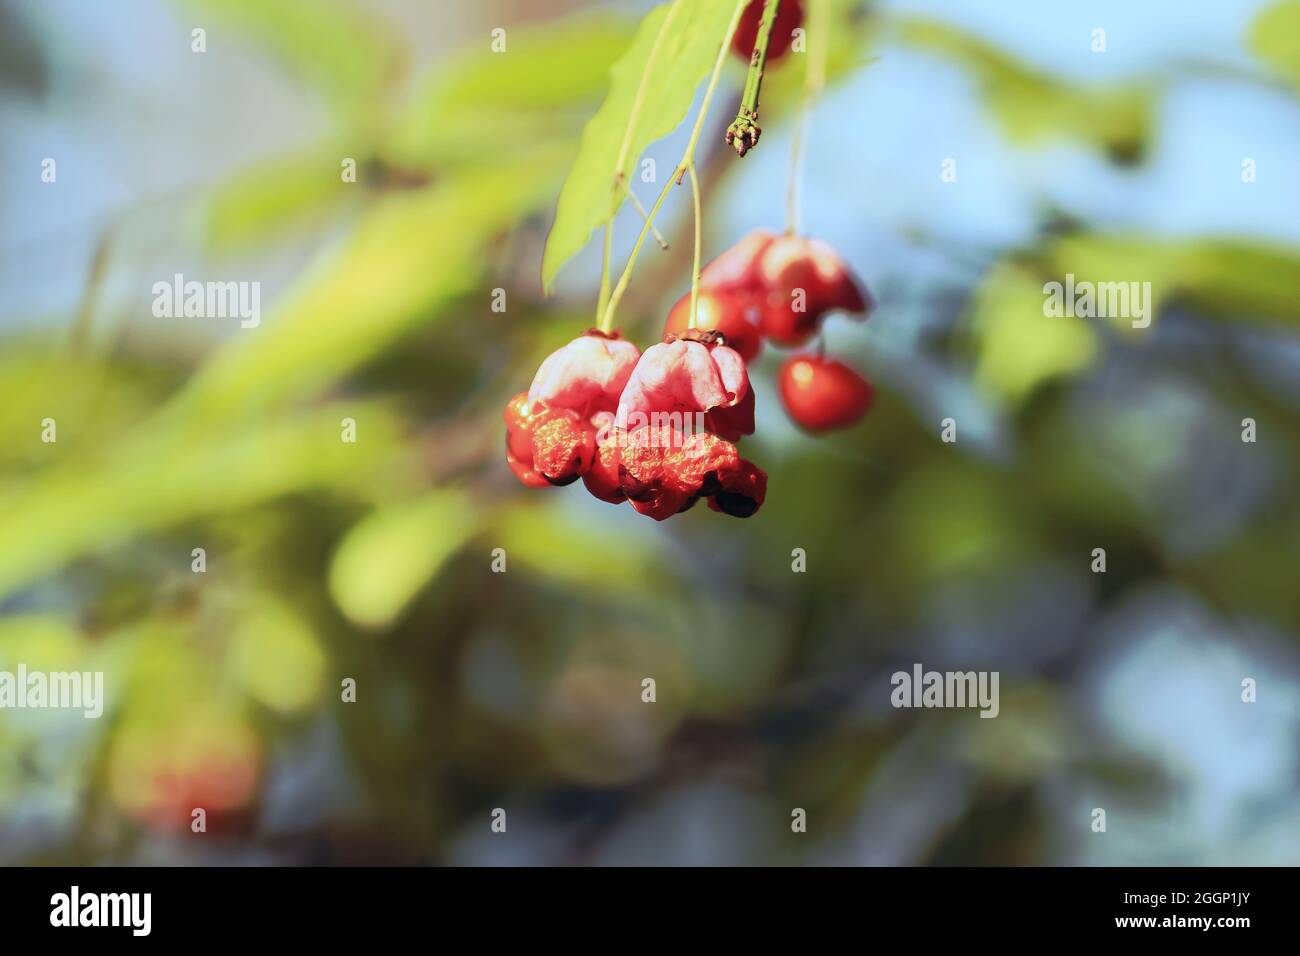 Euonymus verrucosus, Warty-barked Spindle. Orange-pink berries on branch wiht green foliage in sunlight against blue sky background. Watercolor effect Stock Photo